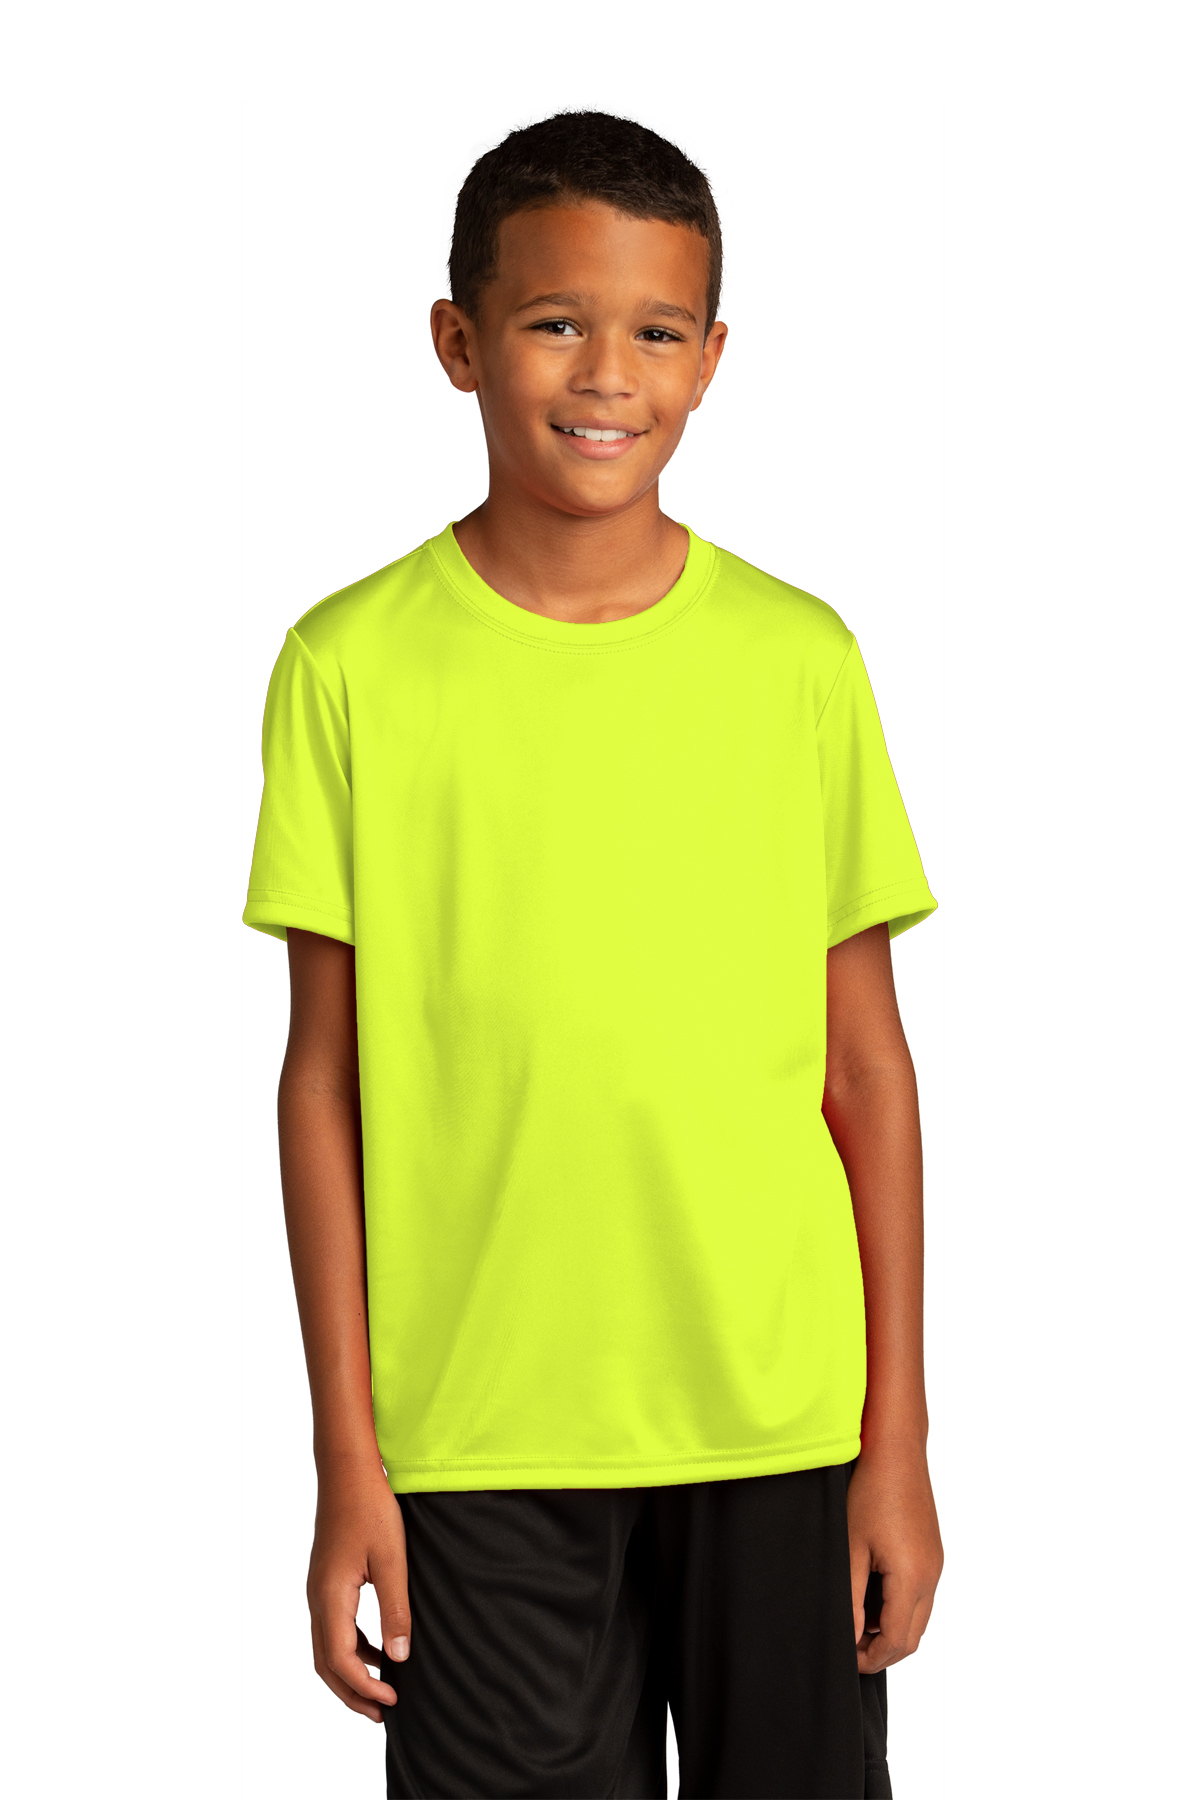 SanMar Re-Compete Youth Sport-Tek Tee Product PosiCharge | |